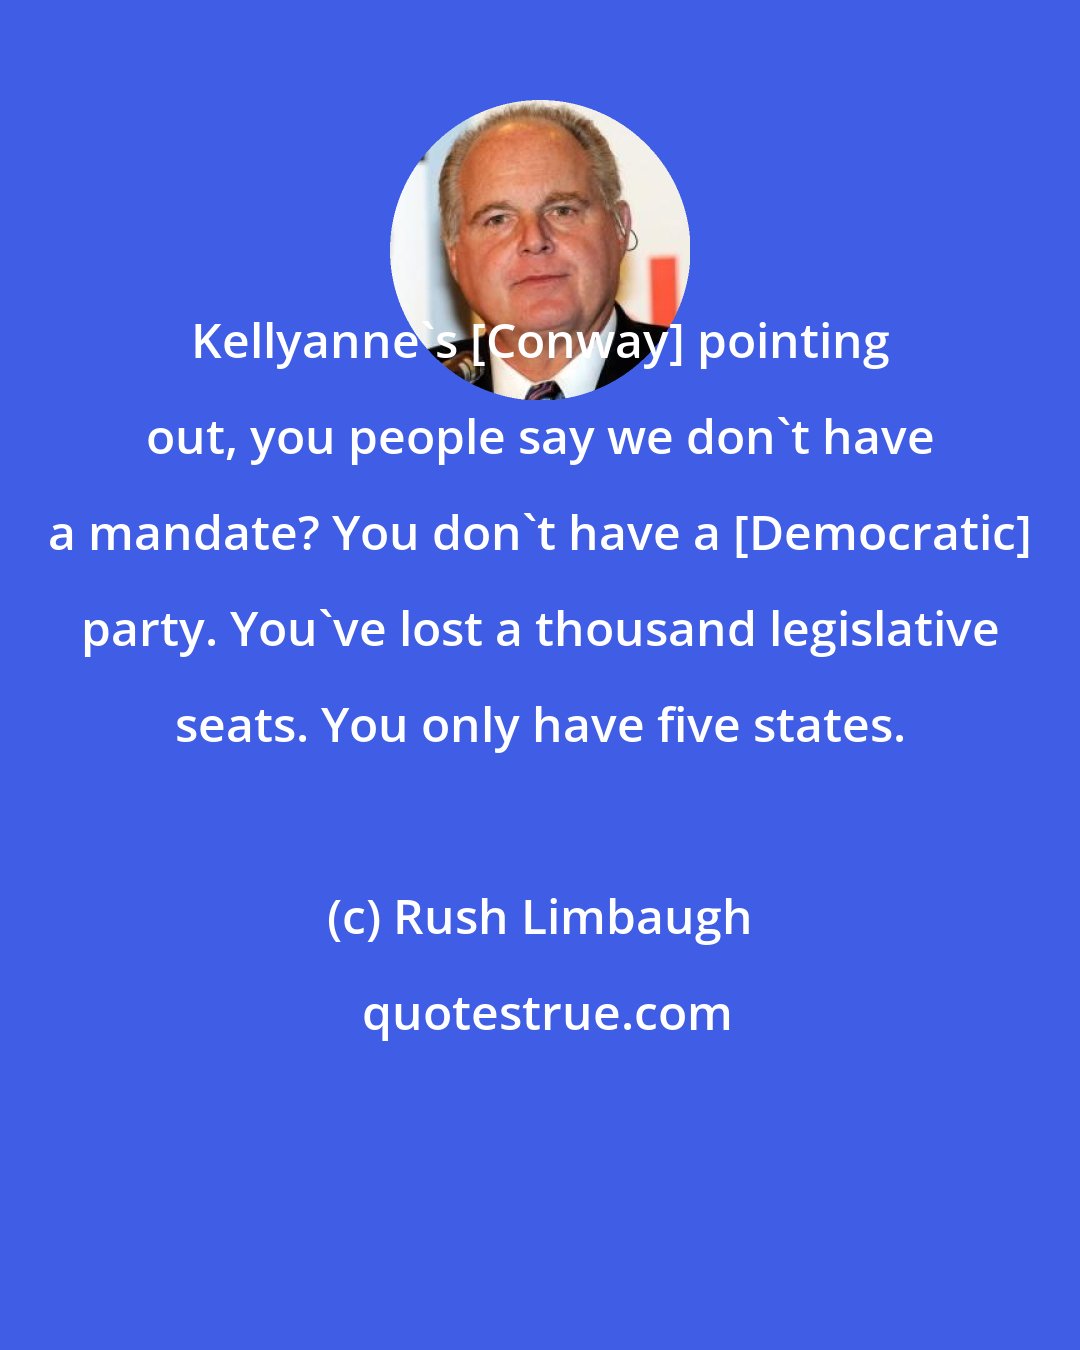 Rush Limbaugh: Kellyanne's [Conway] pointing out, you people say we don't have a mandate? You don't have a [Democratic] party. You've lost a thousand legislative seats. You only have five states.